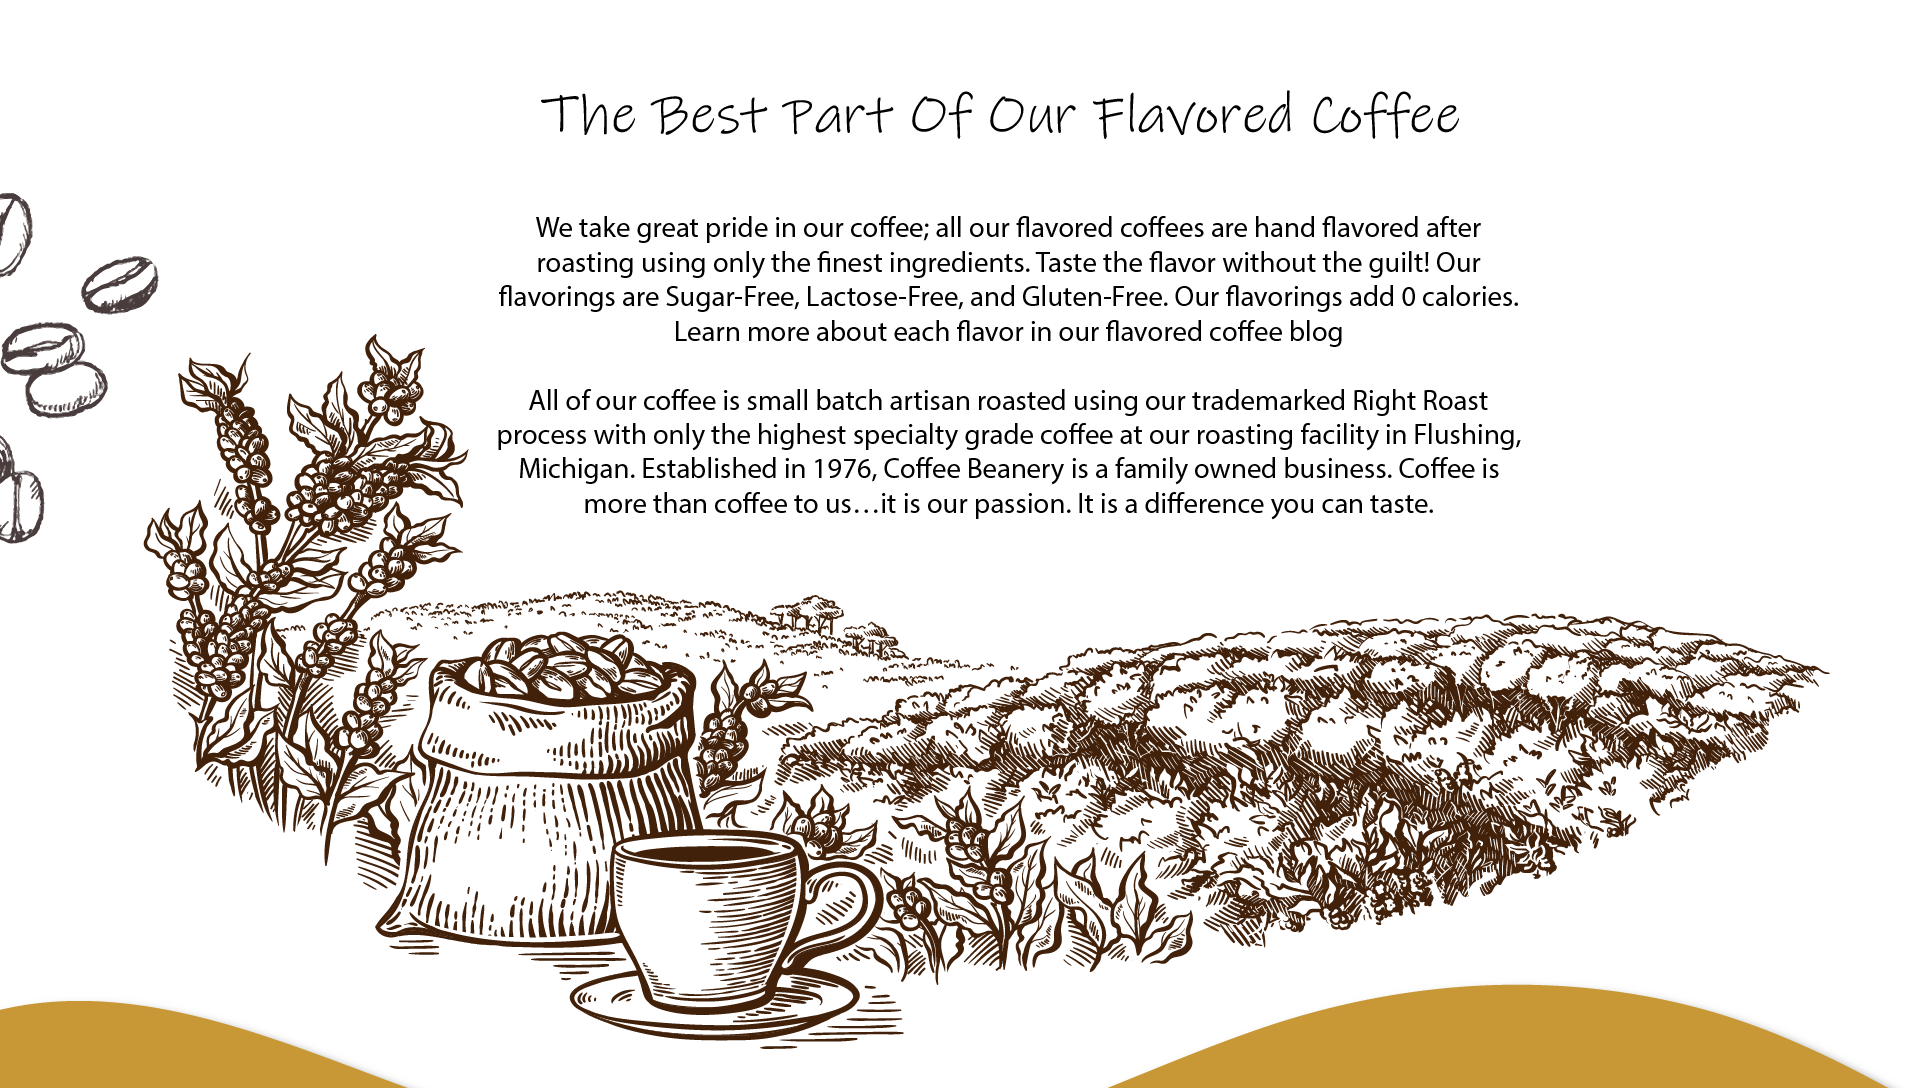 We take great pride in our coffee; all our flavored coffees are hand flavored after roasting using only the finest ingredients.